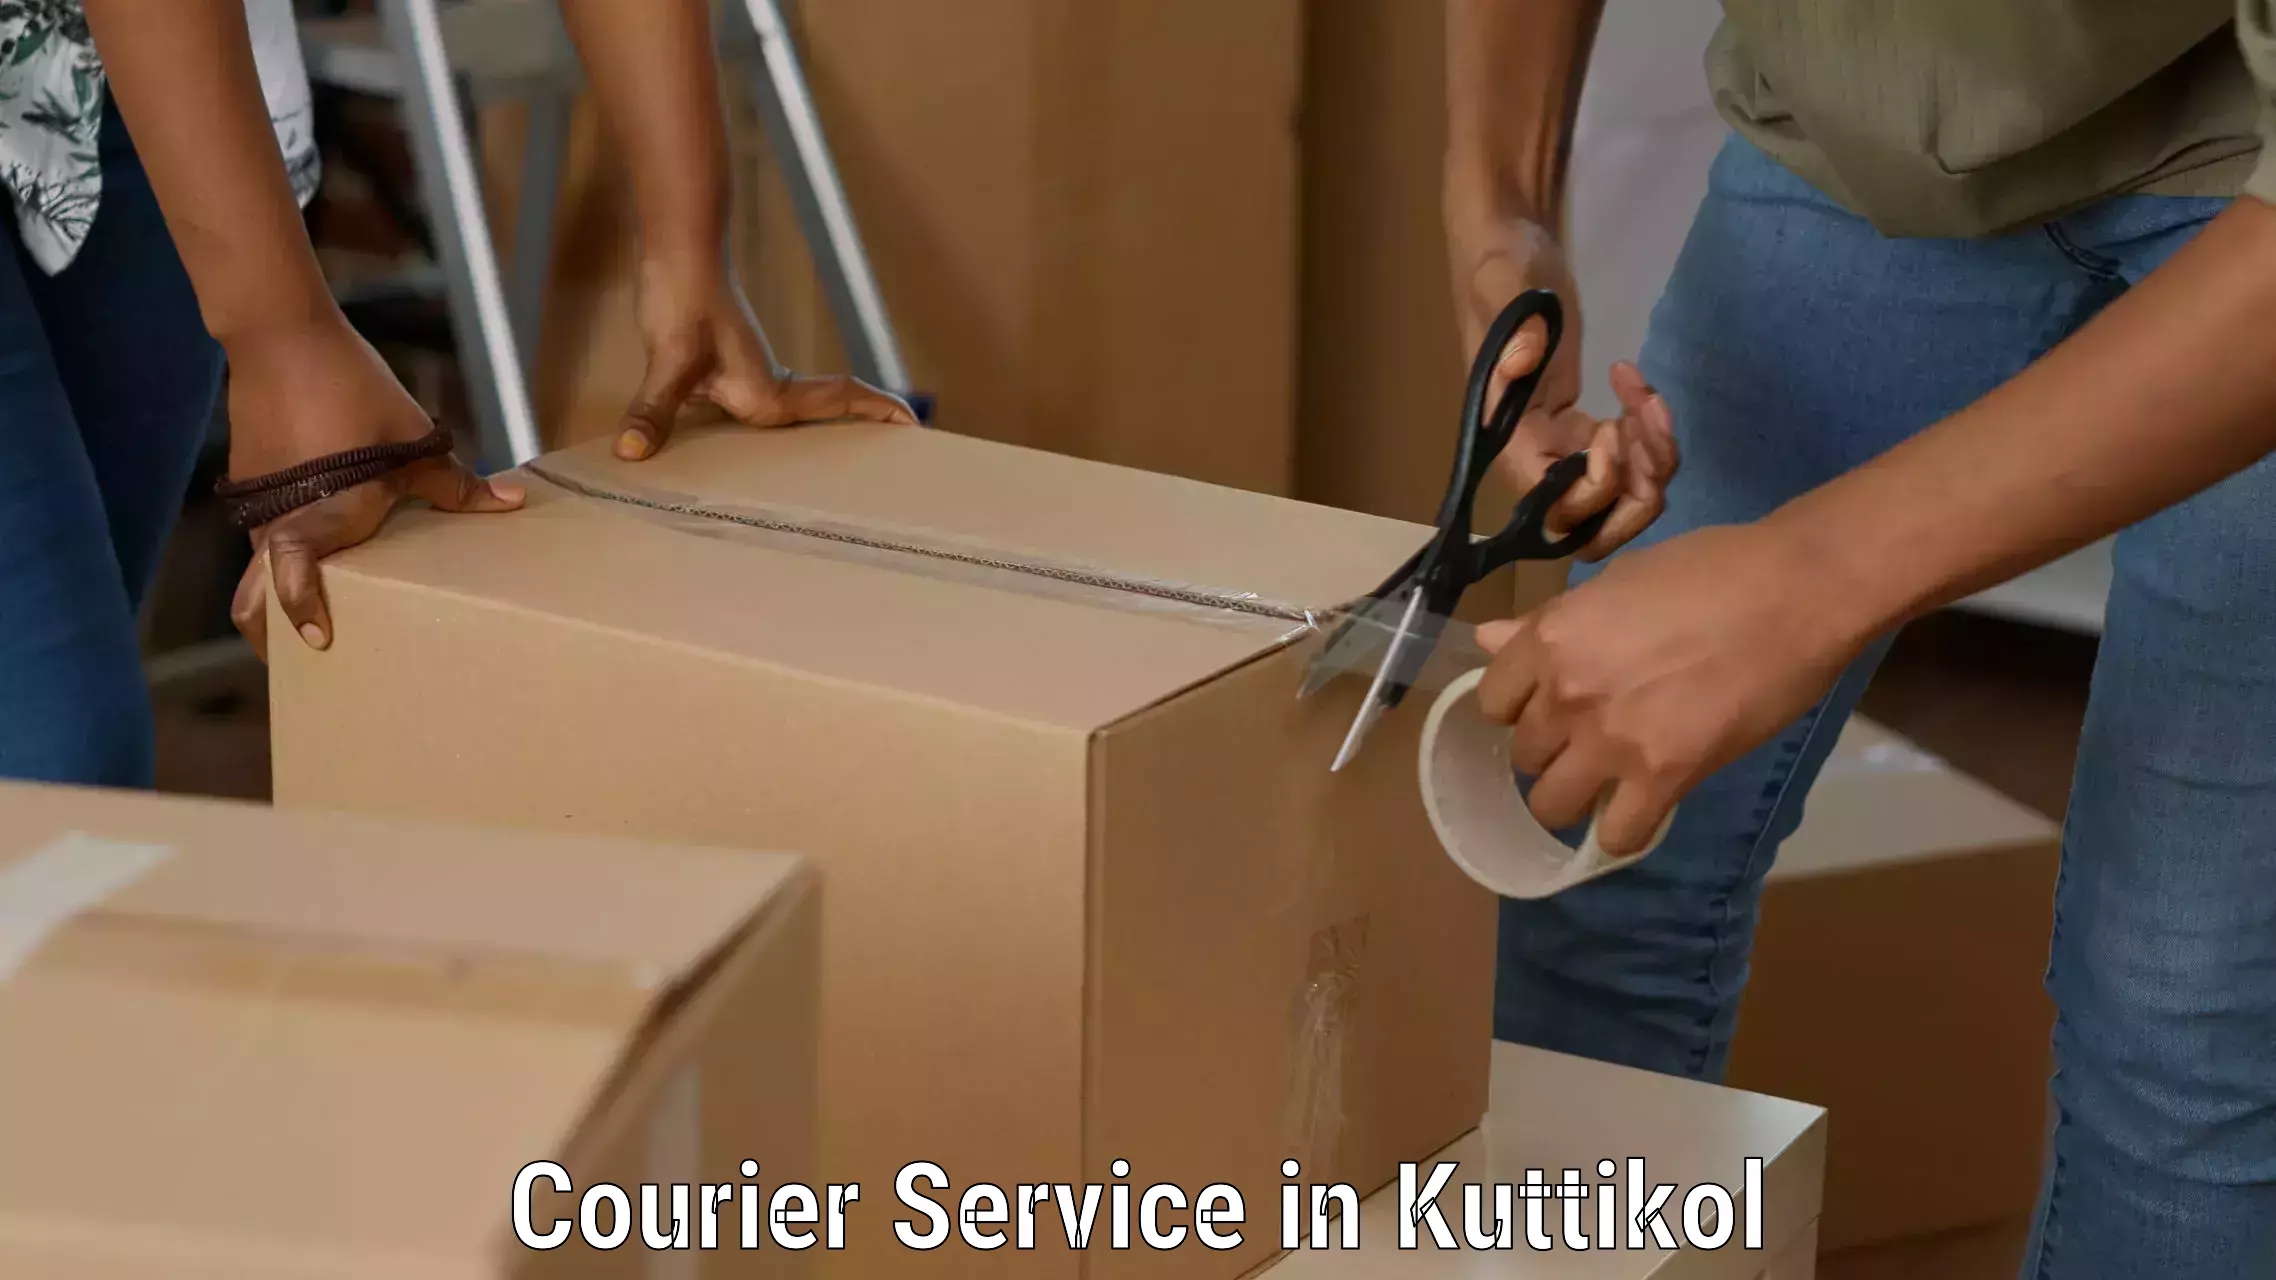 Rapid shipping services in Kuttikol